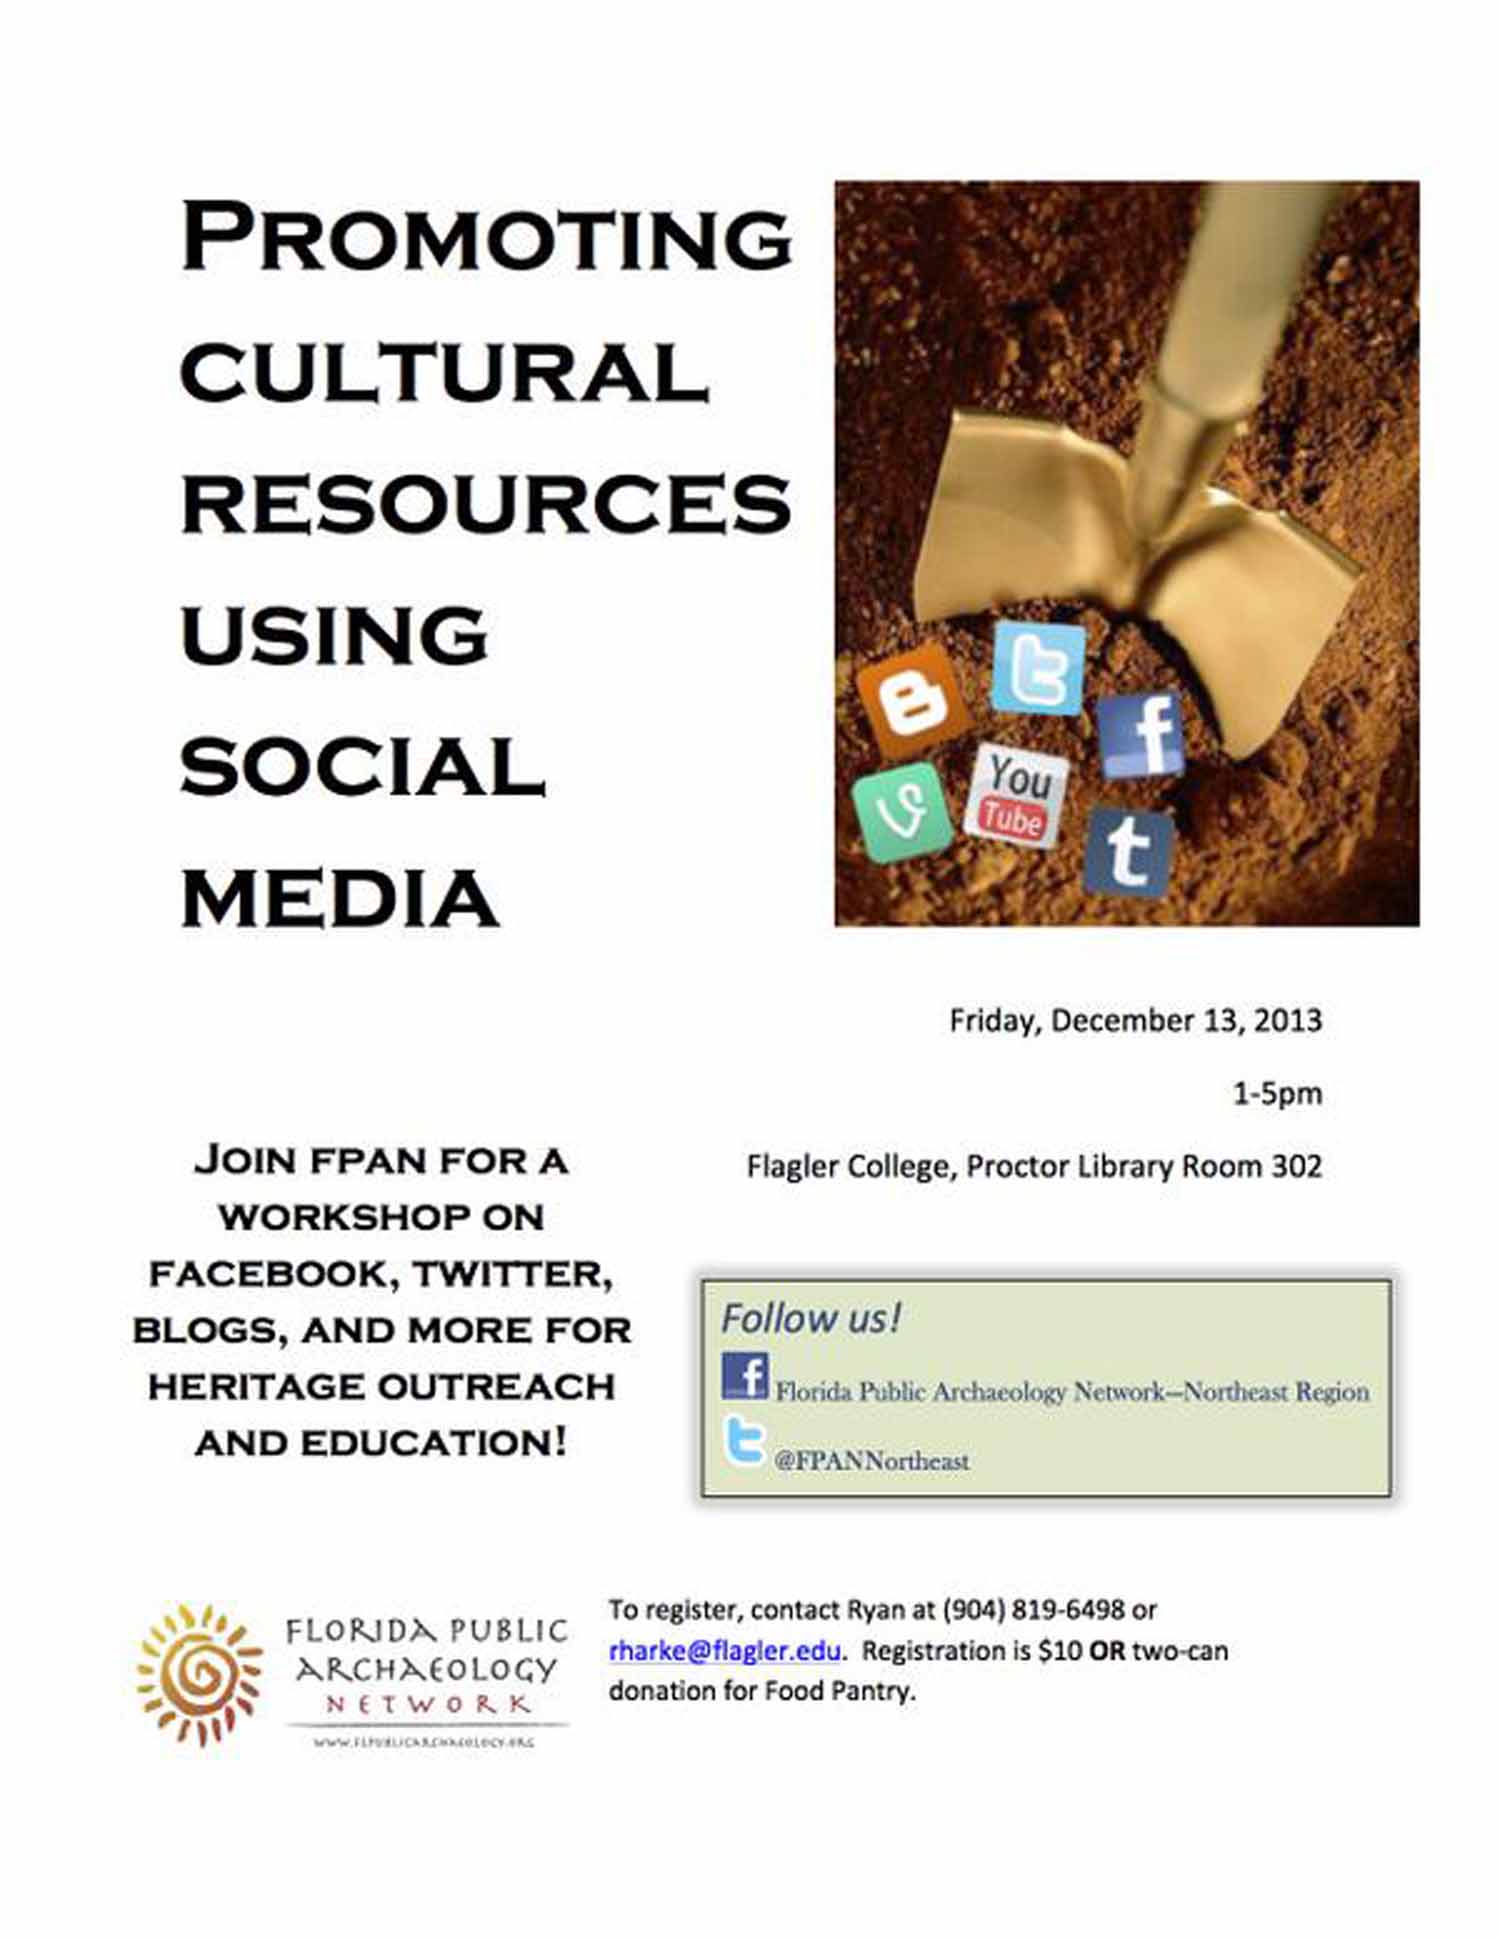 Twitter as a Cultural Resource Outreach Tool | Archaeology, Museums & Outreach1500 x 1940